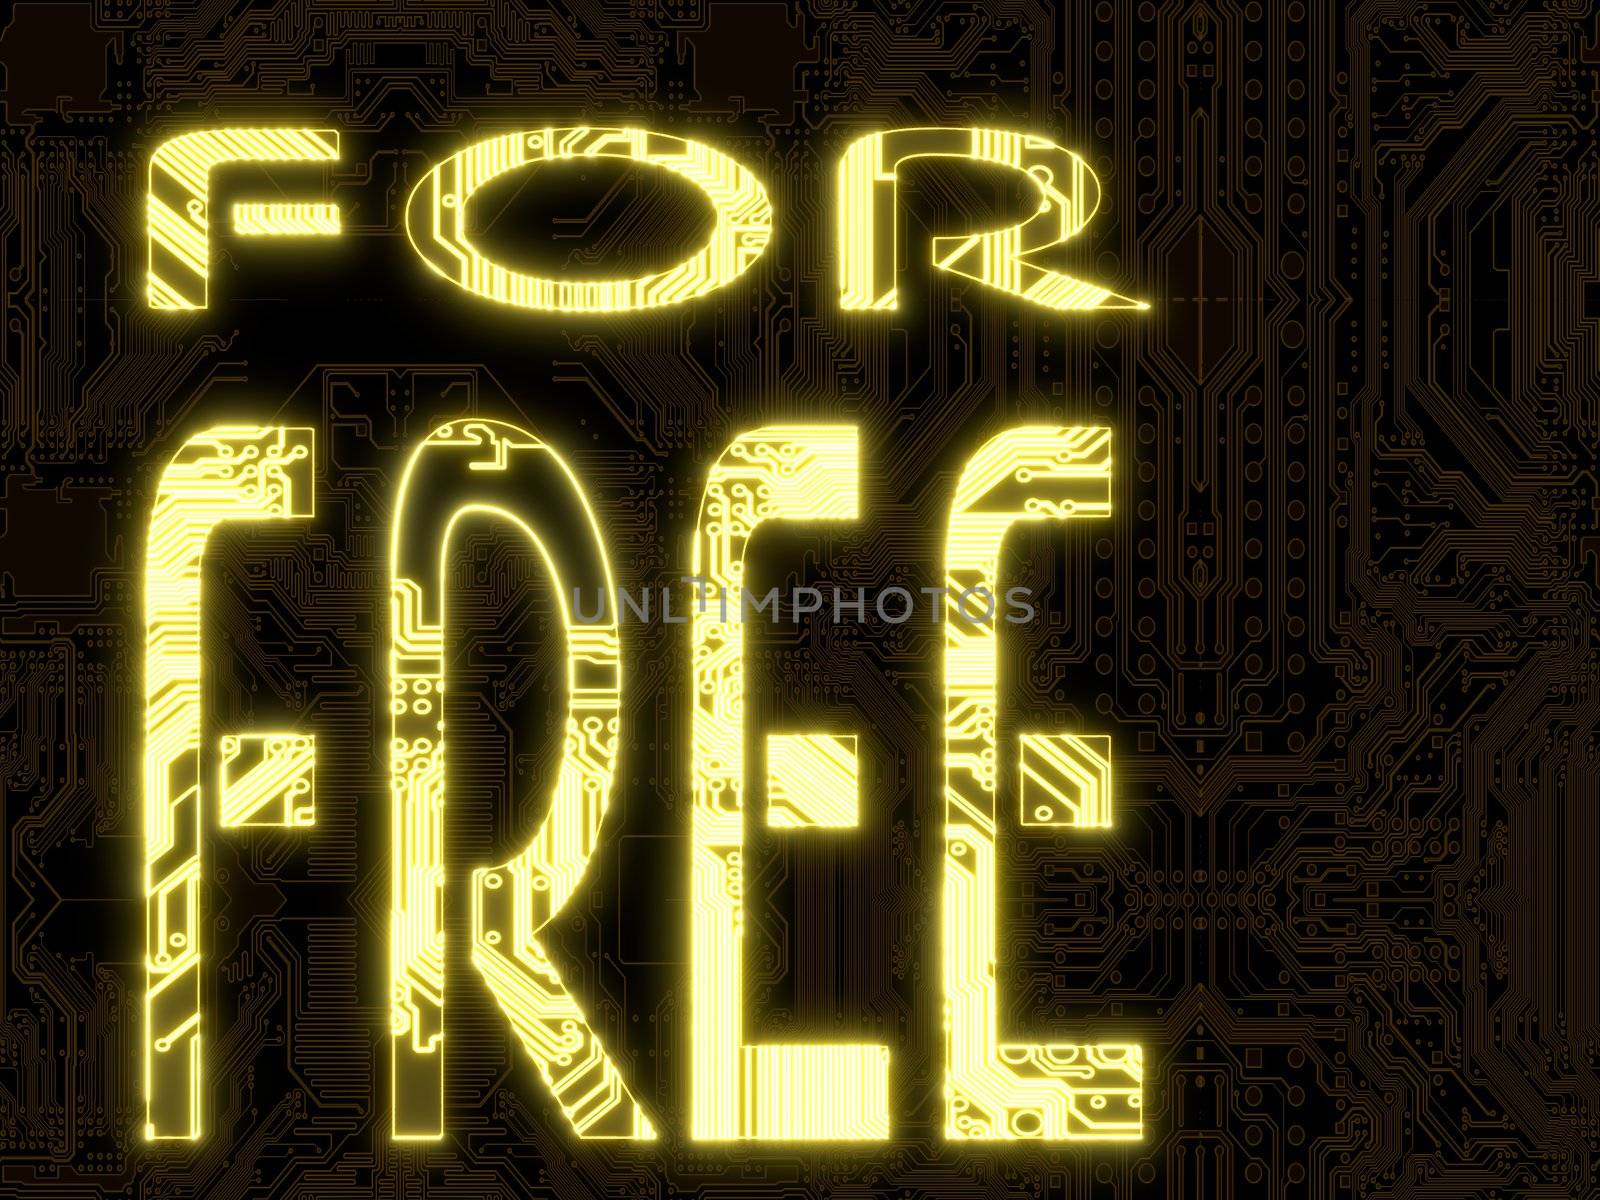 3D Graphic flare electronic glowing for sale symbol in a dark background on a computer chip